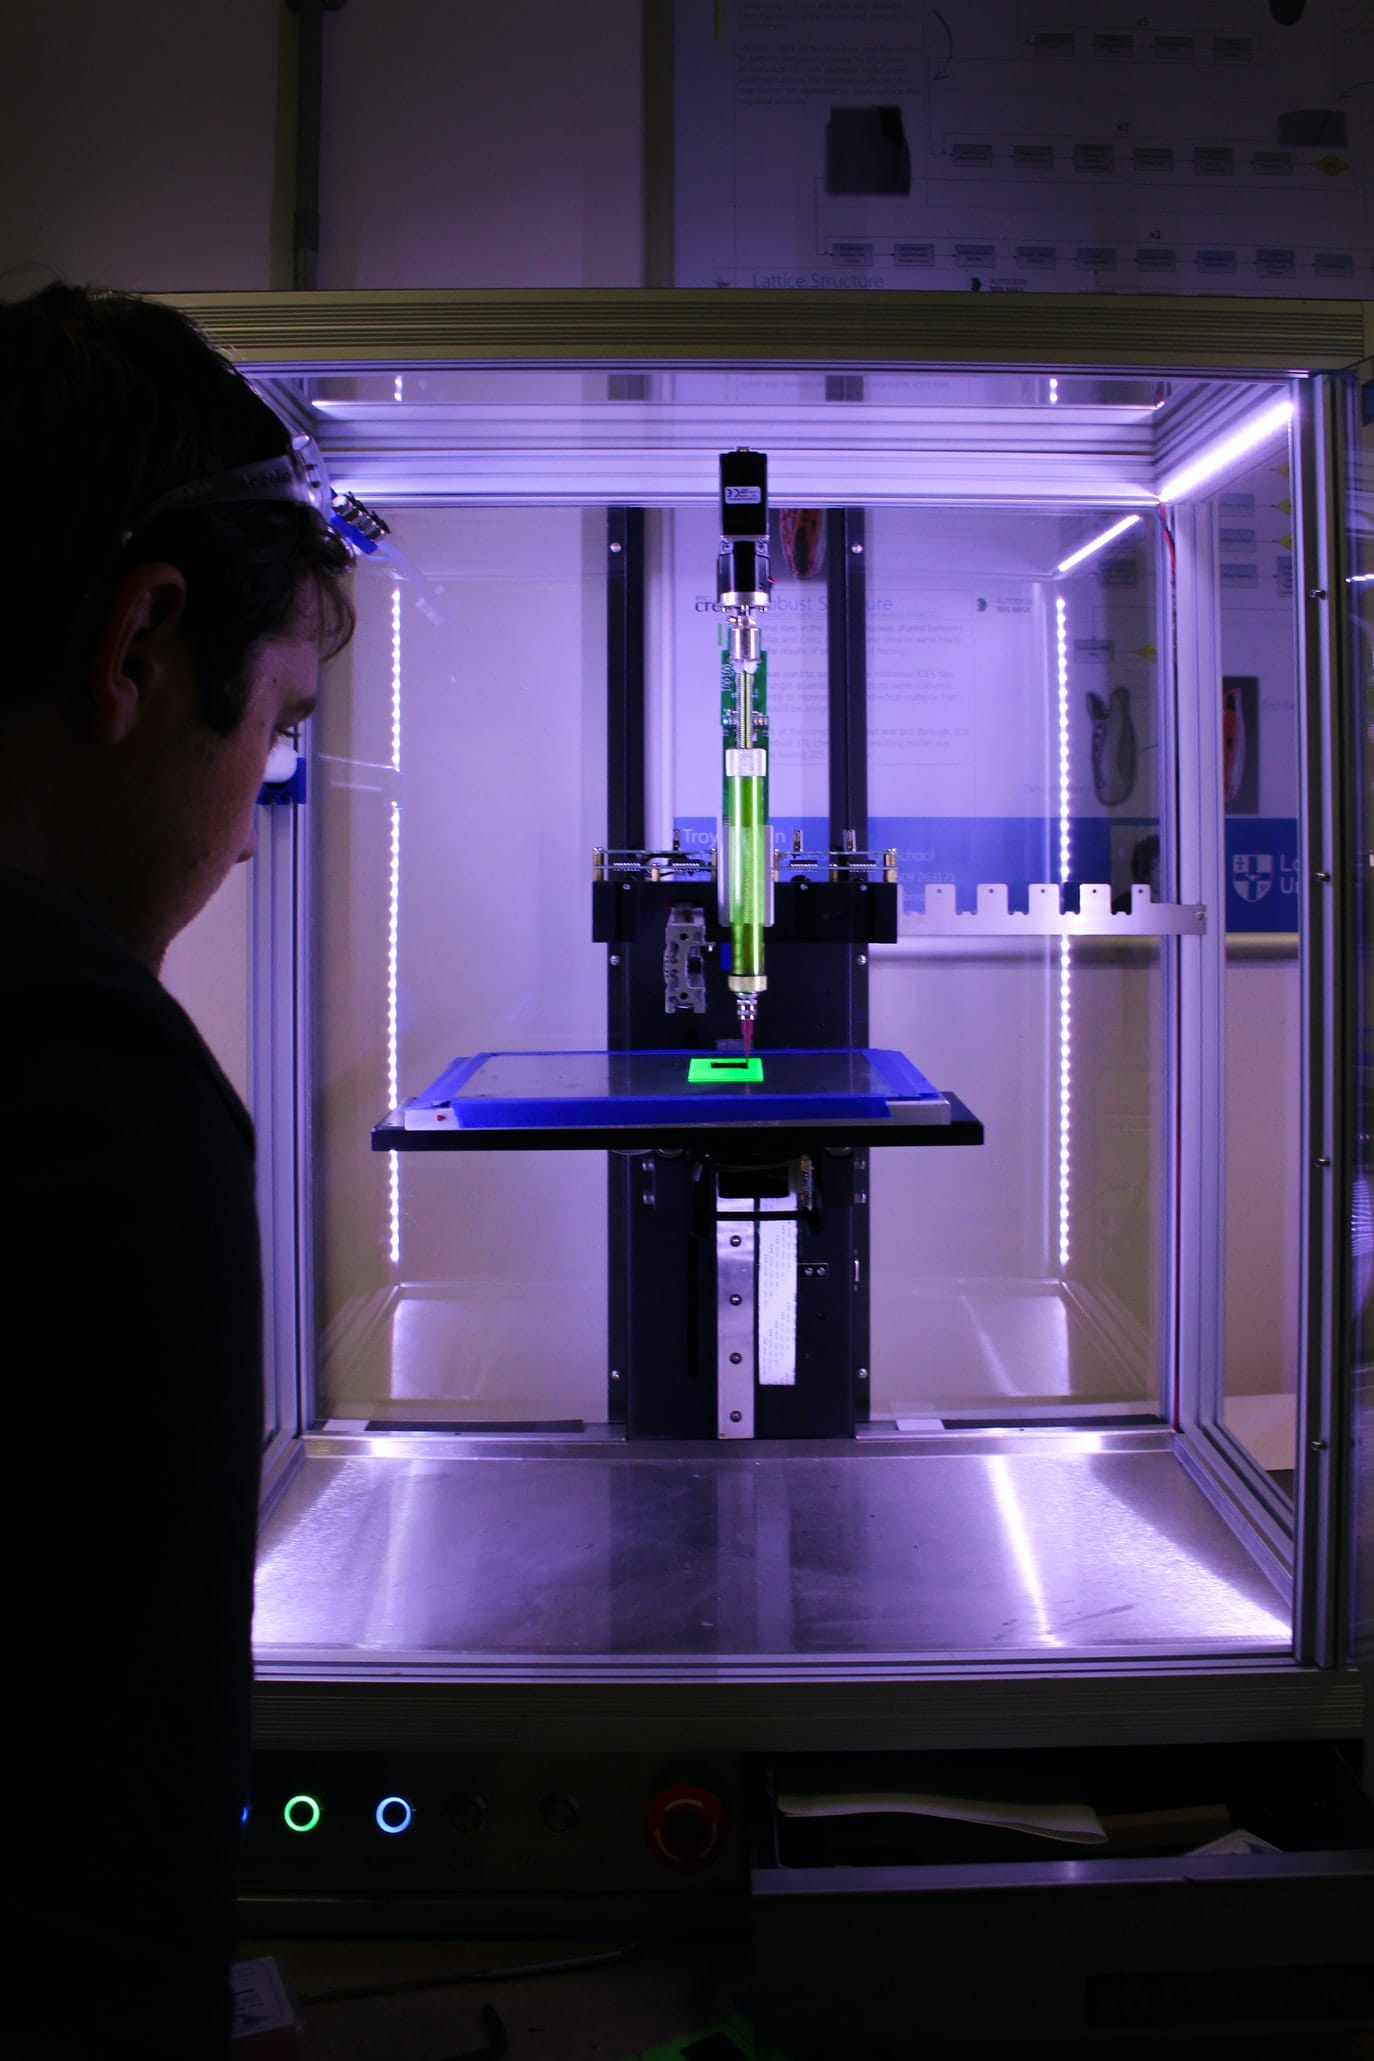 Relativity Space’s massive 3D printers are reinventing rockets, and manufacturing